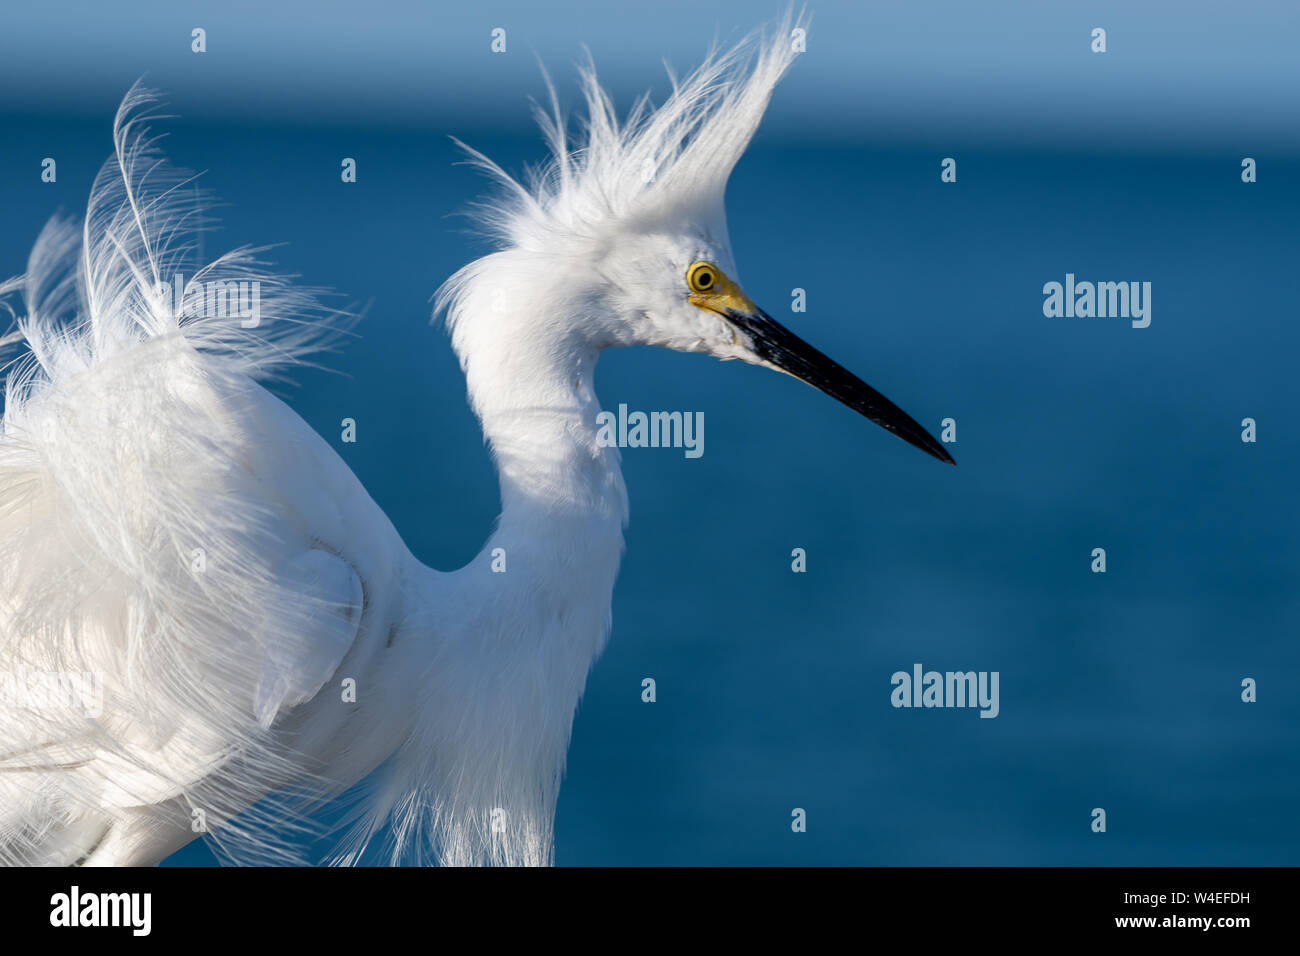 Snowy egret having a bad feather day - spiked feathers Stock Photo